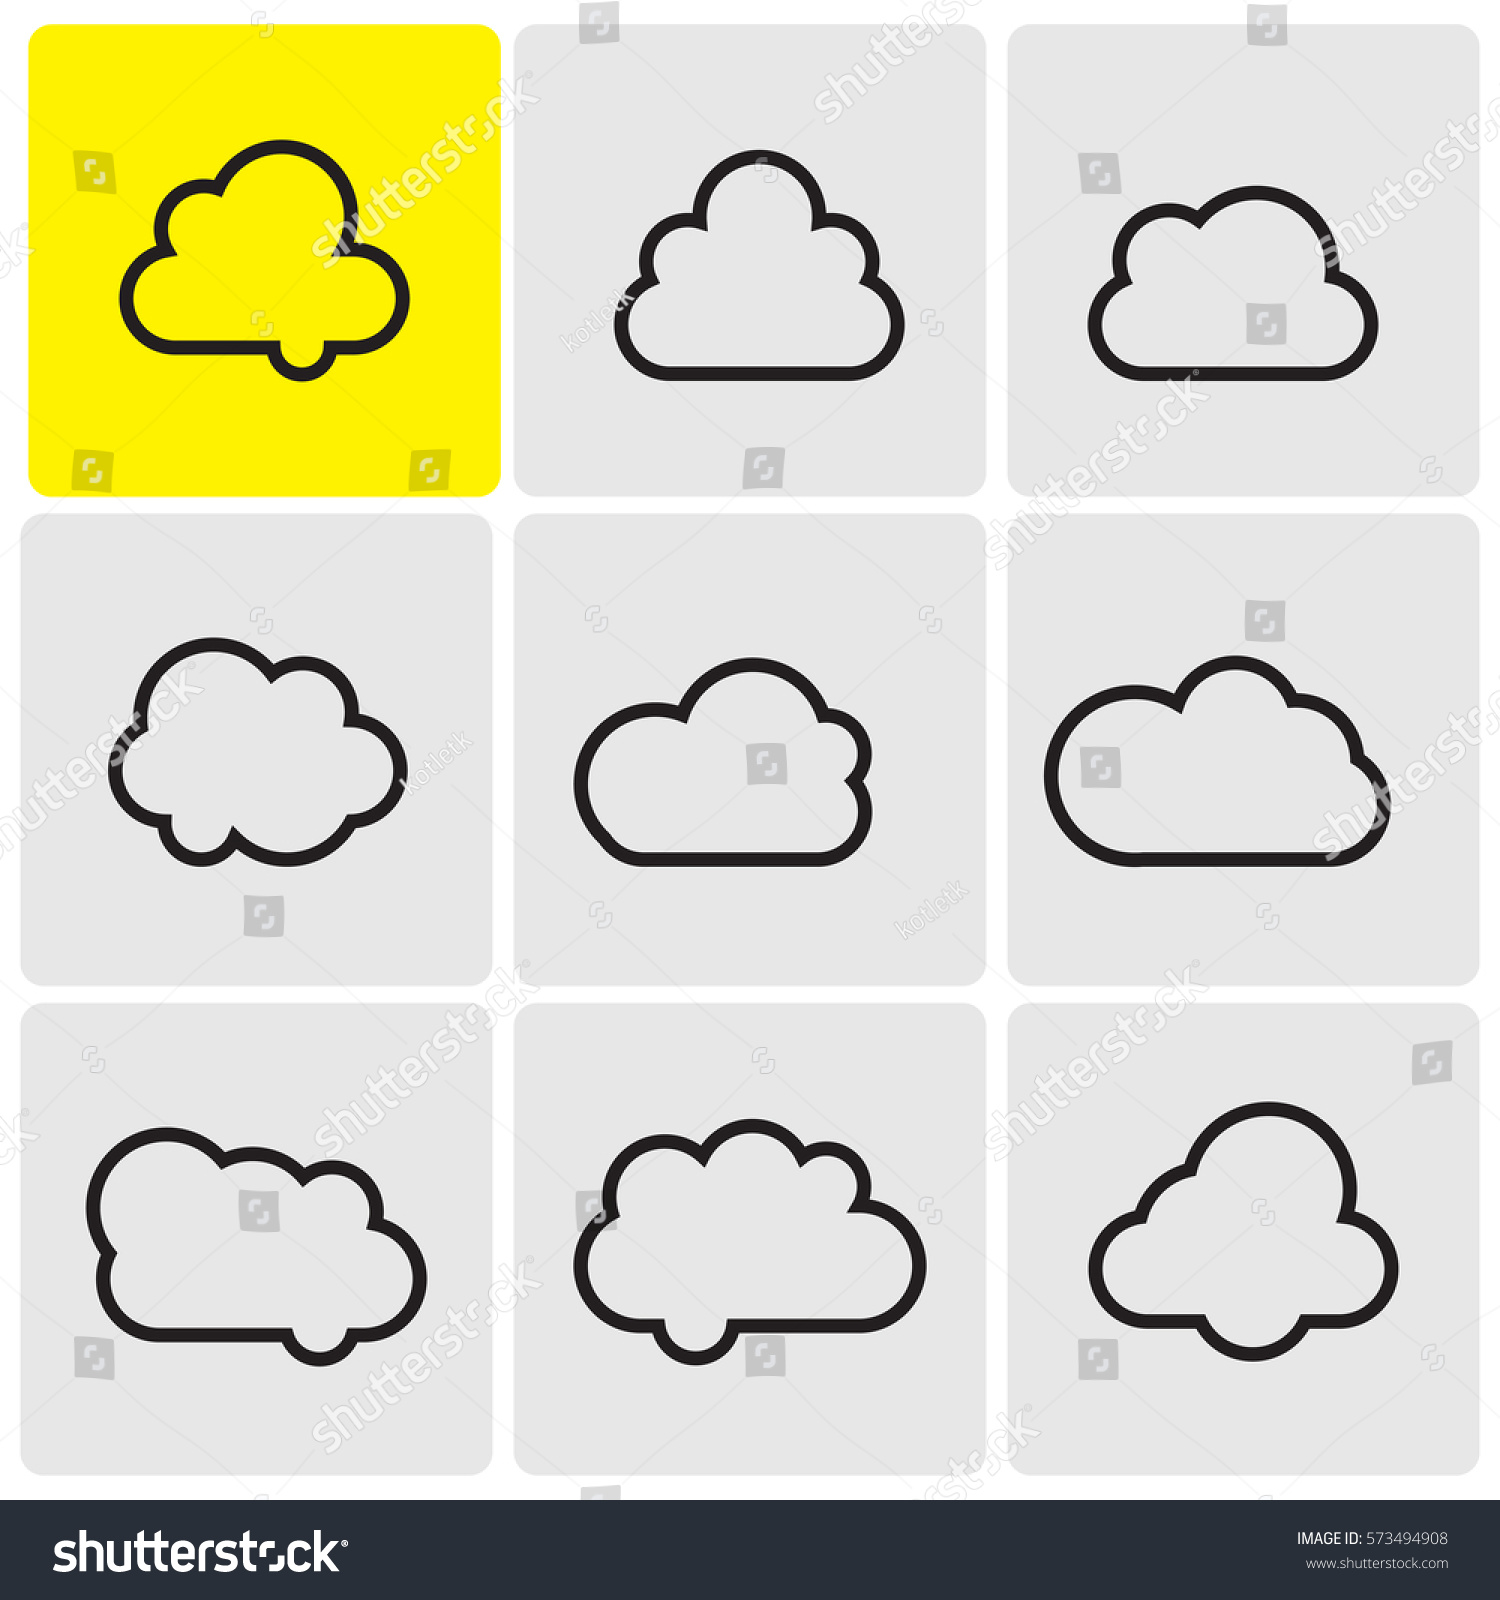 Clouds Line Icons Stock Vector 573494908 - Shutterstock